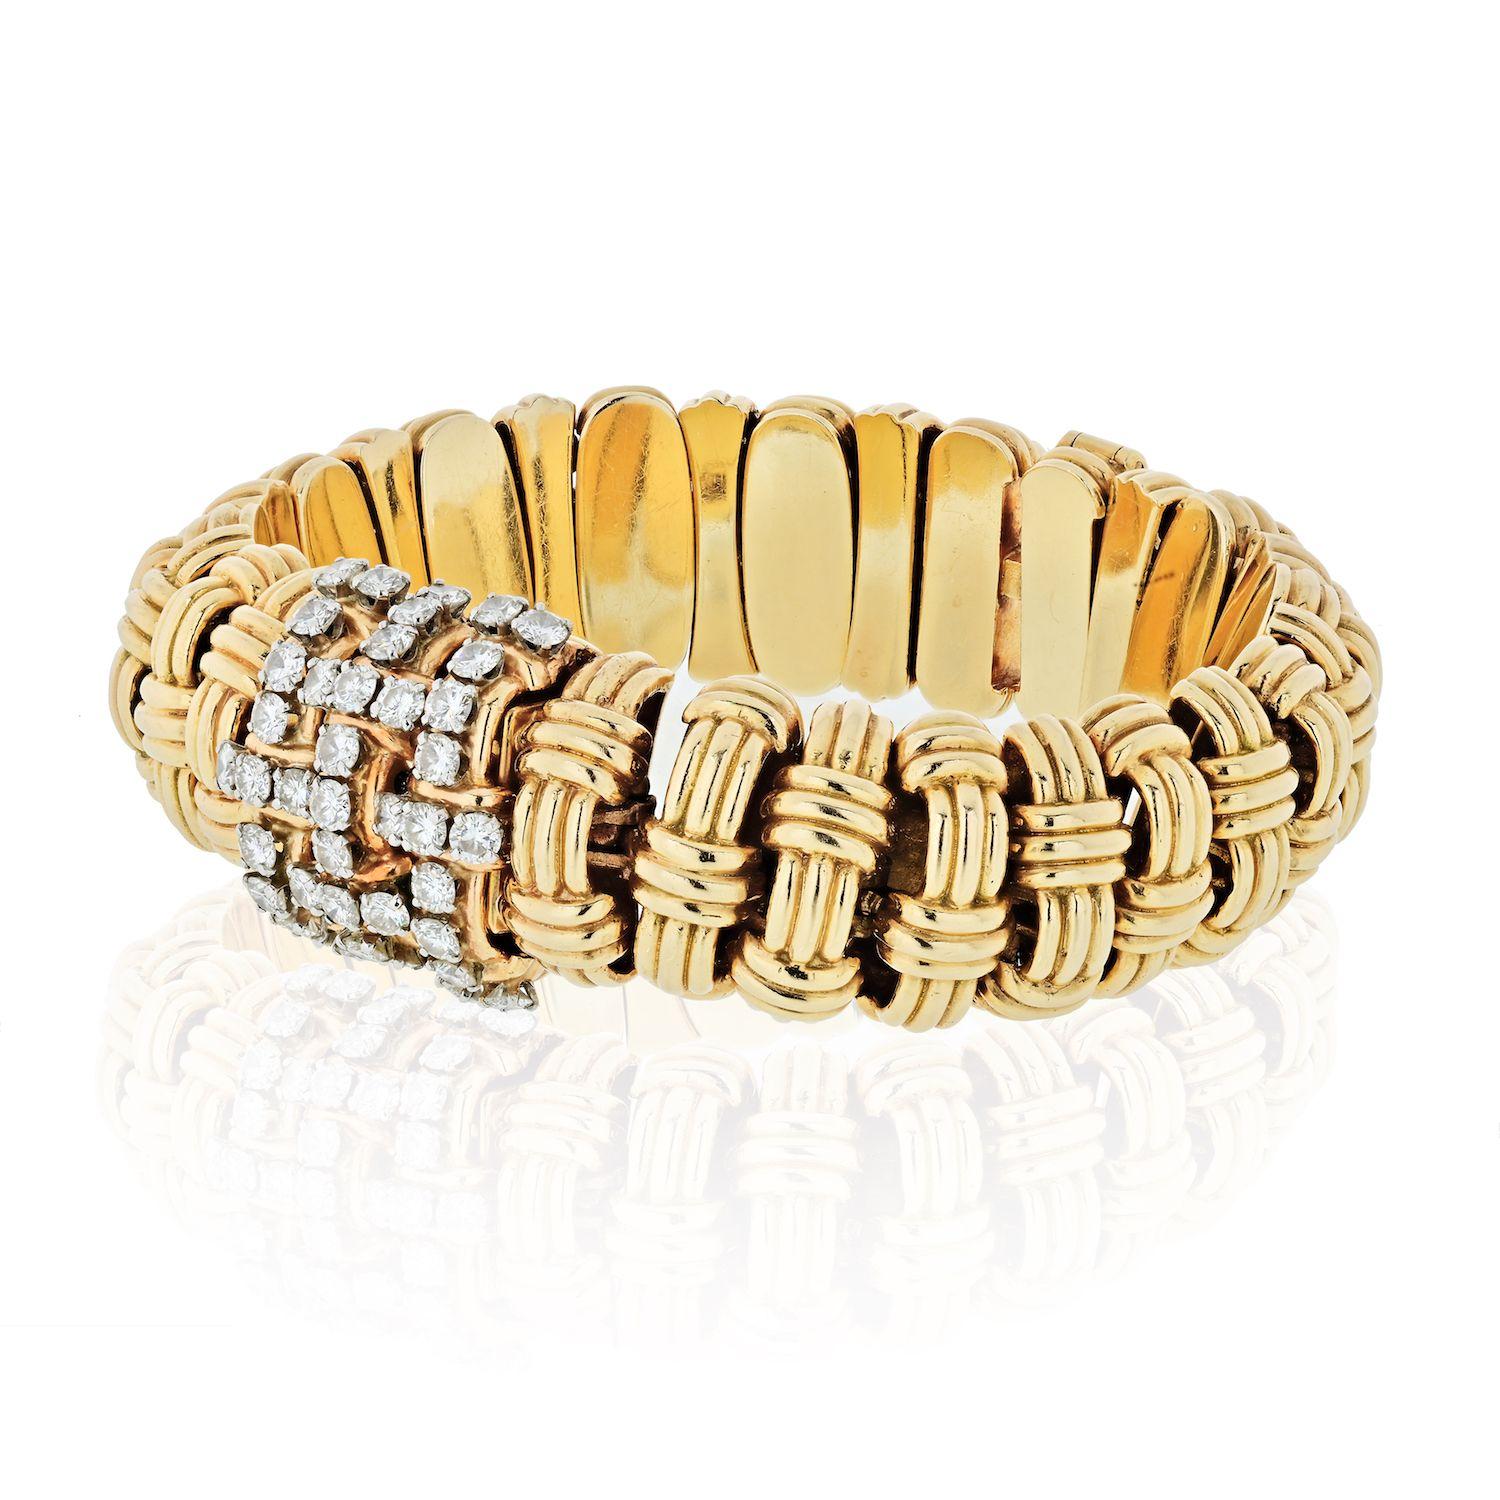 Bracelet crafted in 14K gold, with a 14K gold caseback; stick hour markers, inner circumference measures approximately 8 inches.
The bracelet of domed ribbed links overlaid with ribbed bands, the cover set with 41 round diamonds ap. 4.50 cts.,